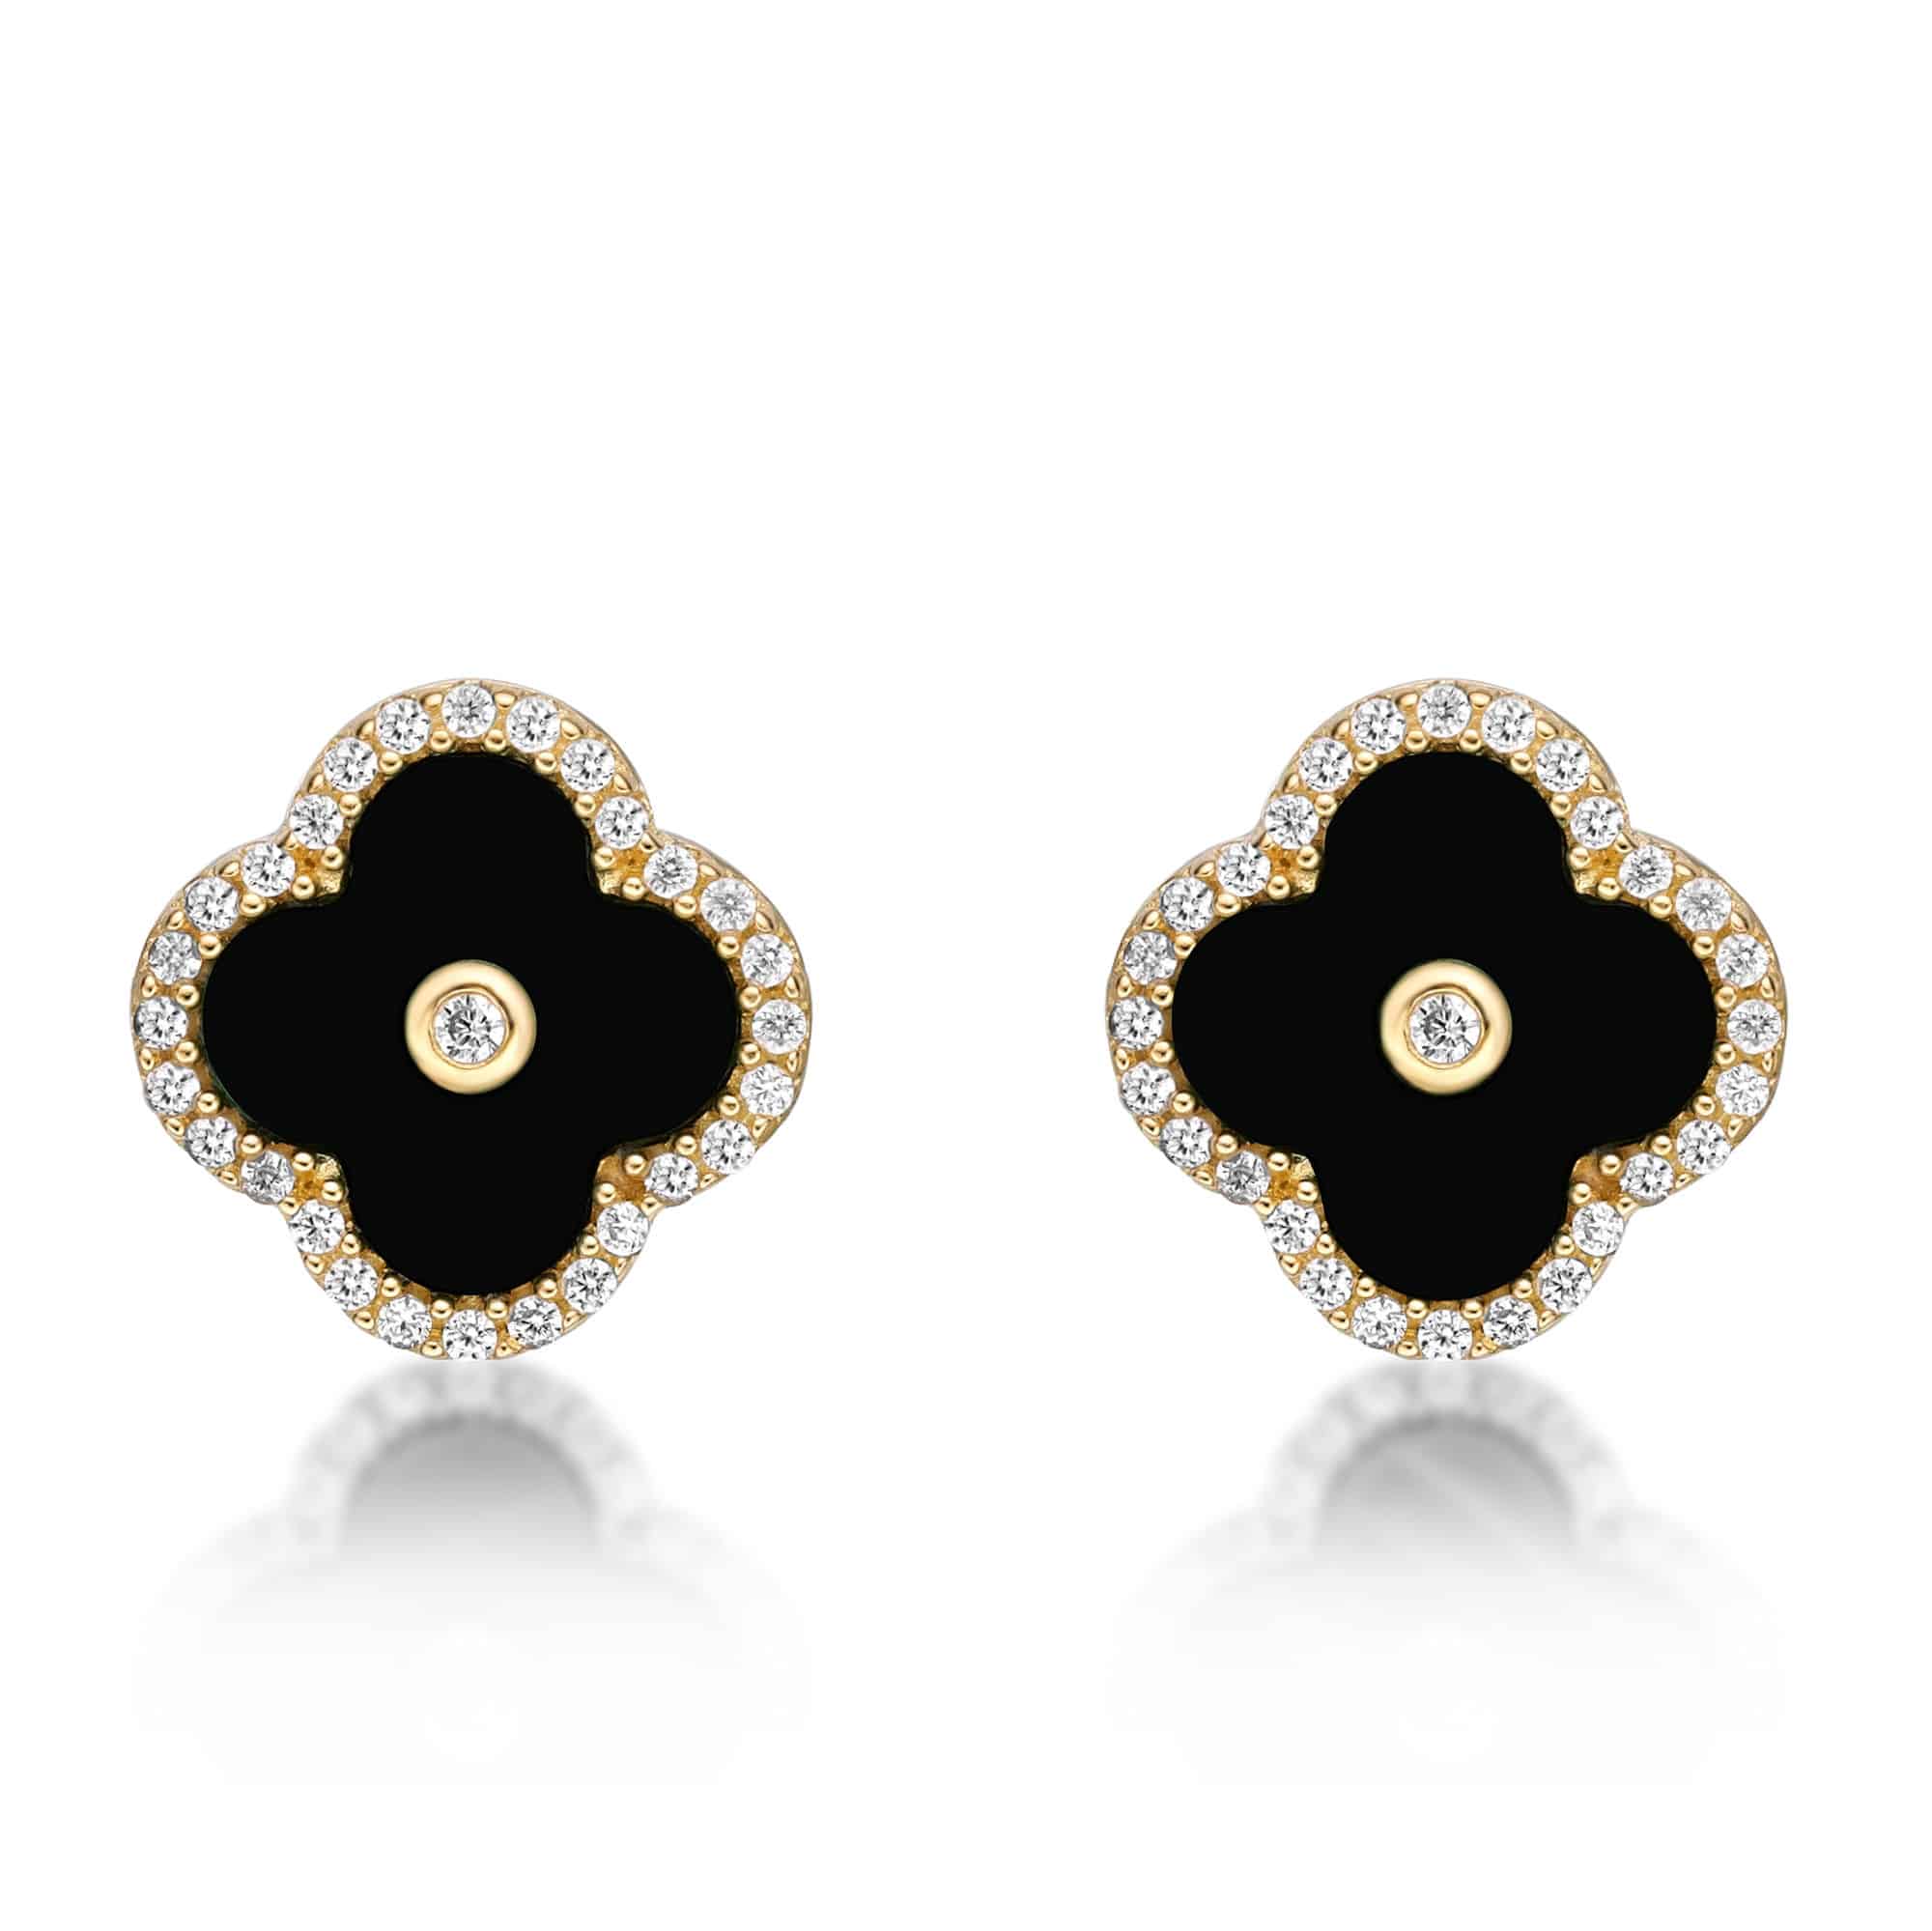 Women's Black Onyx Flower Stud Earrings in Yellow Gold Plated Sterling Silver with Cubic Zirconia Halo - Friction Back - Flora | Lavari Jewelers